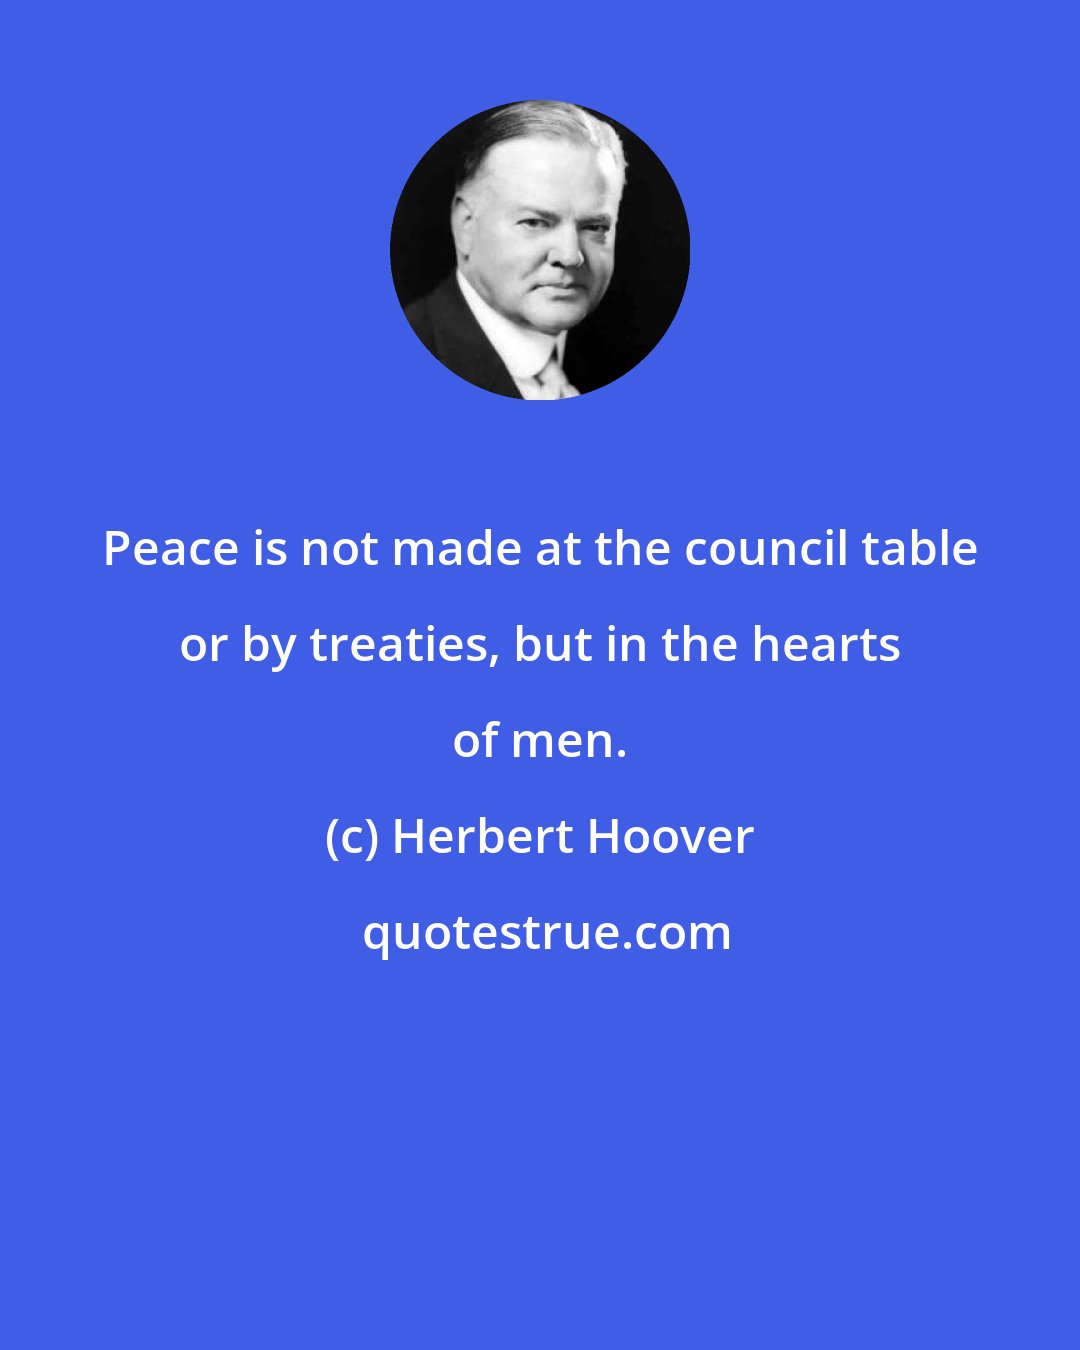 Herbert Hoover: Peace is not made at the council table or by treaties, but in the hearts of men.